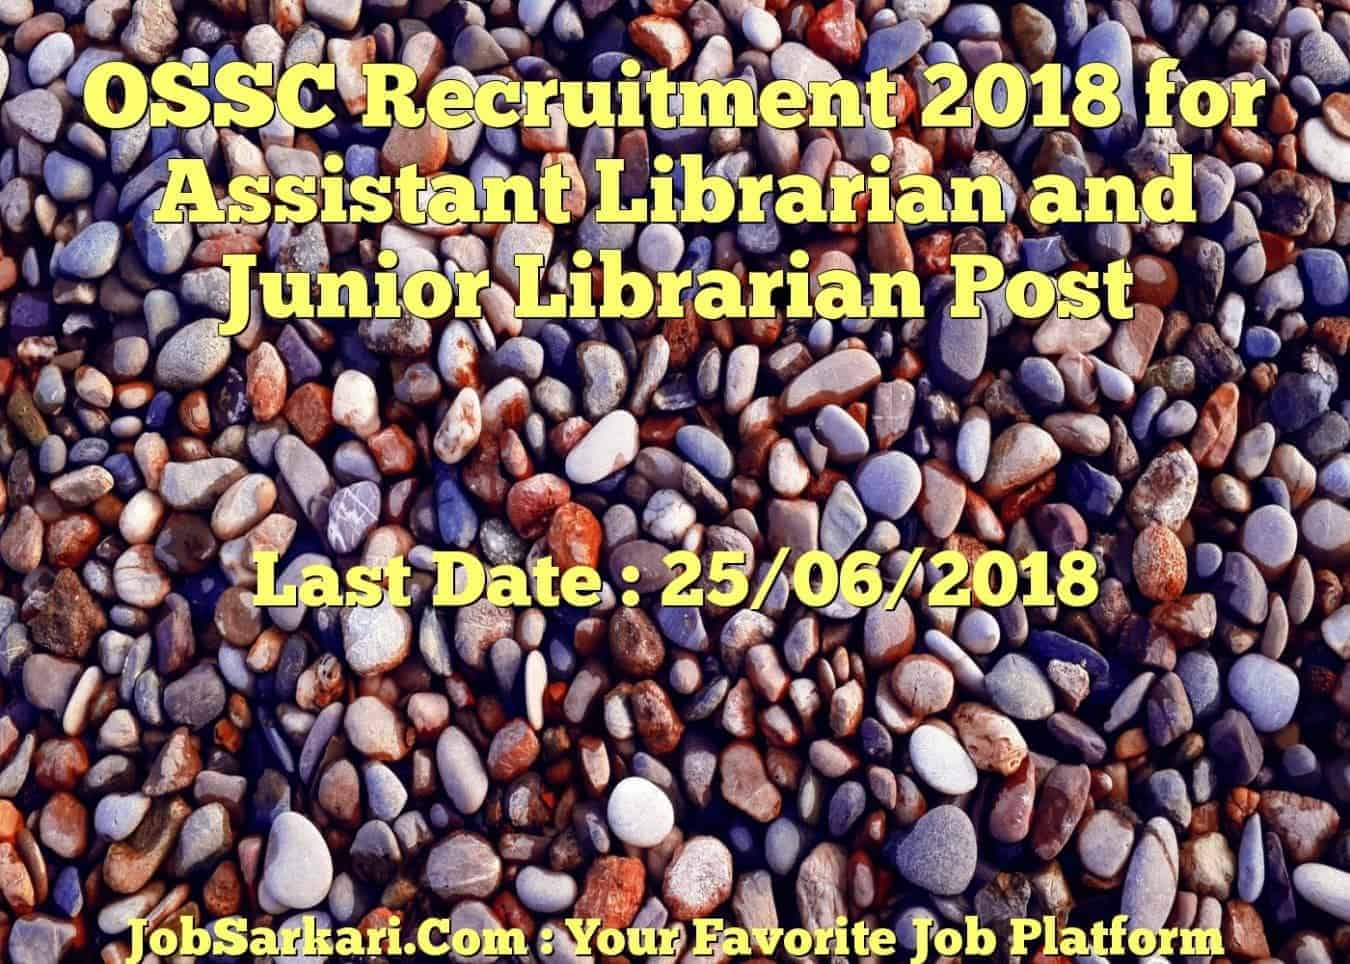 OSSC Recruitment 2018 for Assistant Librarian and Junior Librarian Post